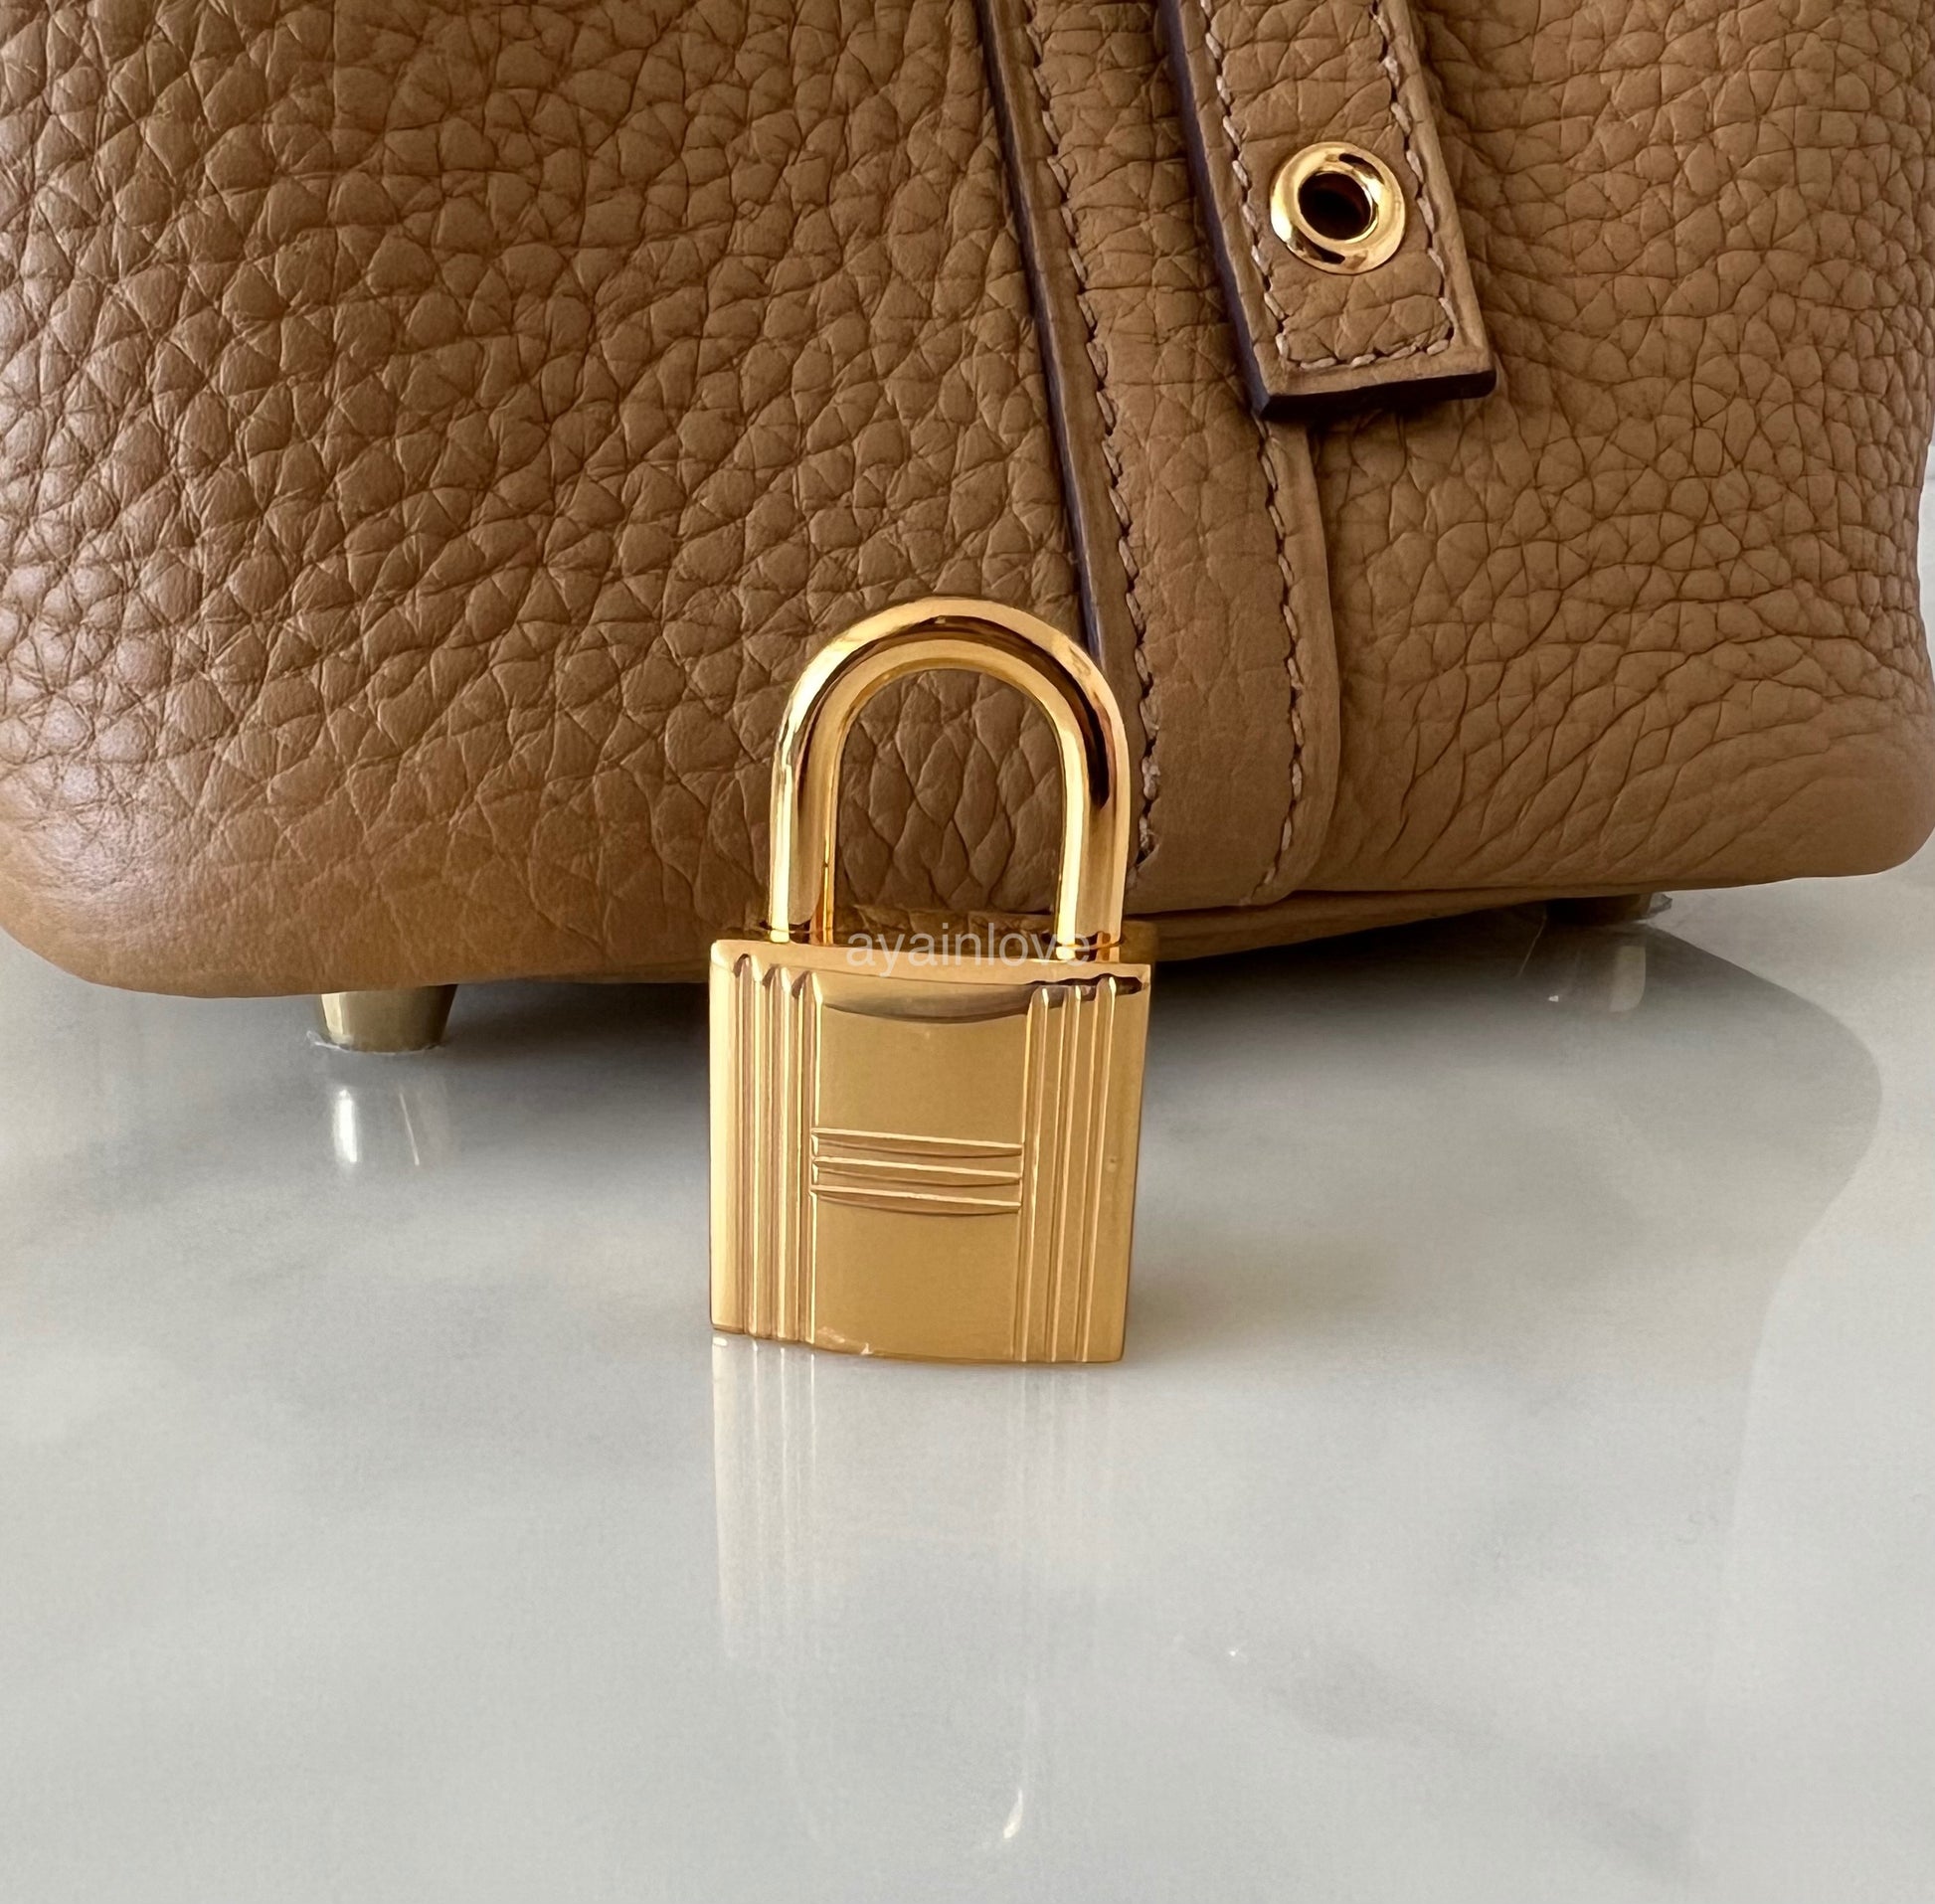 HERMES Picotin Lock 18 4B Biscuit Taurillion Clemence Gold